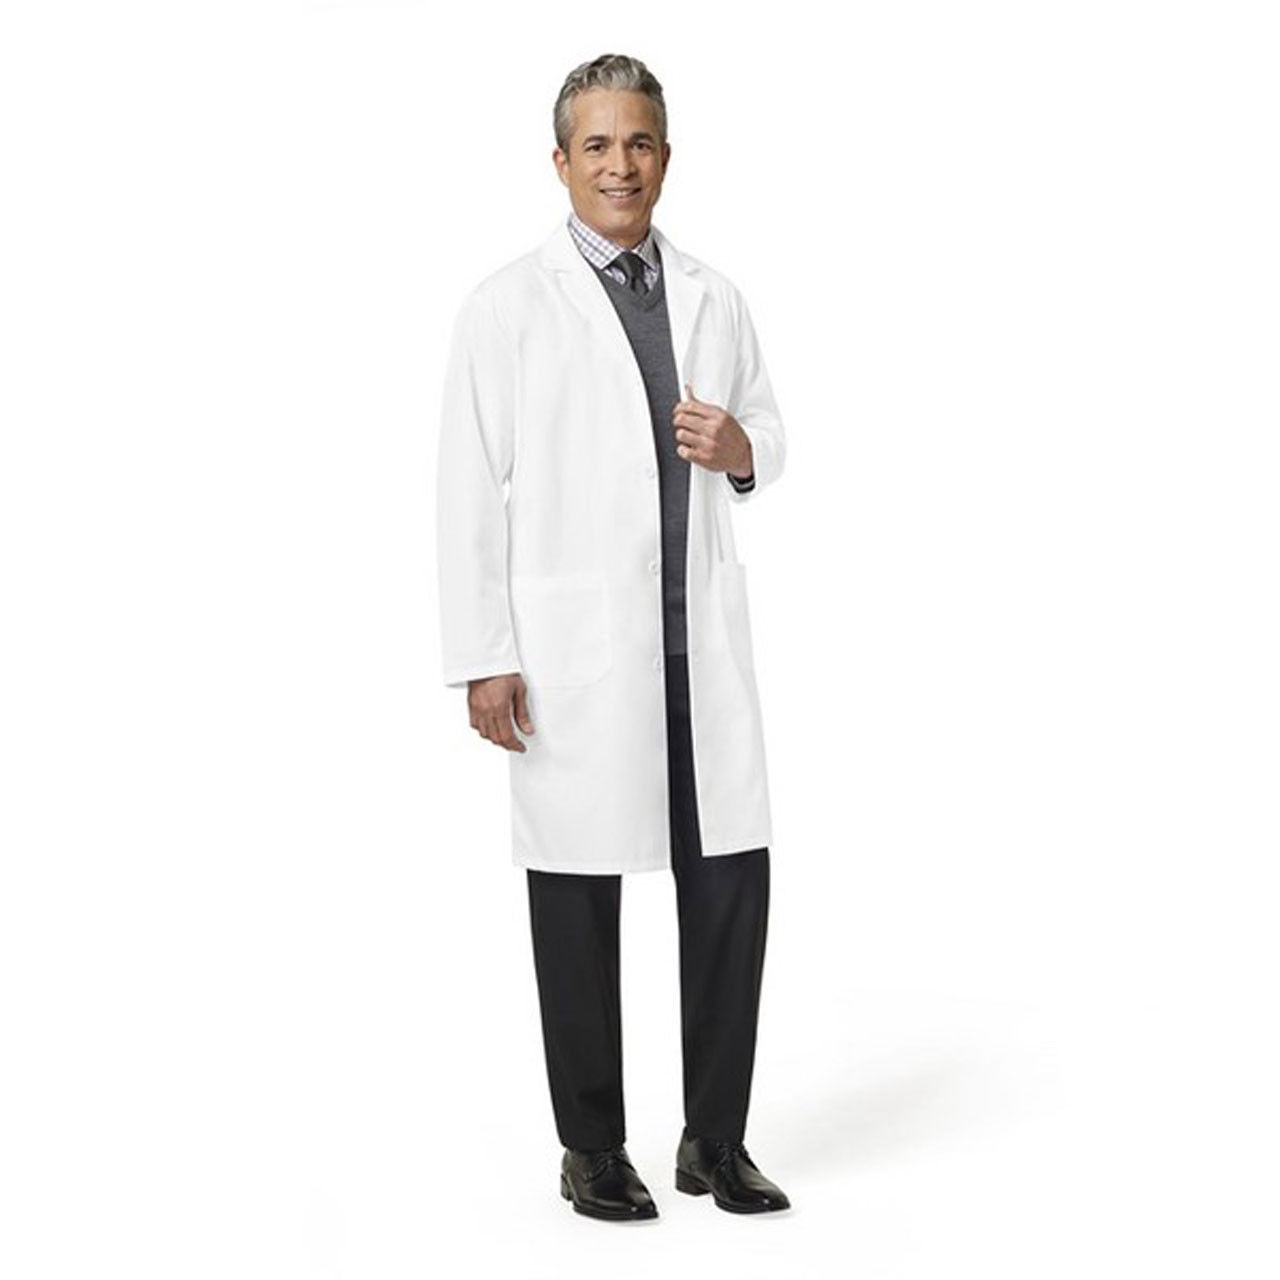 Are bulk lab coats from Fashion Seal designed for my team?